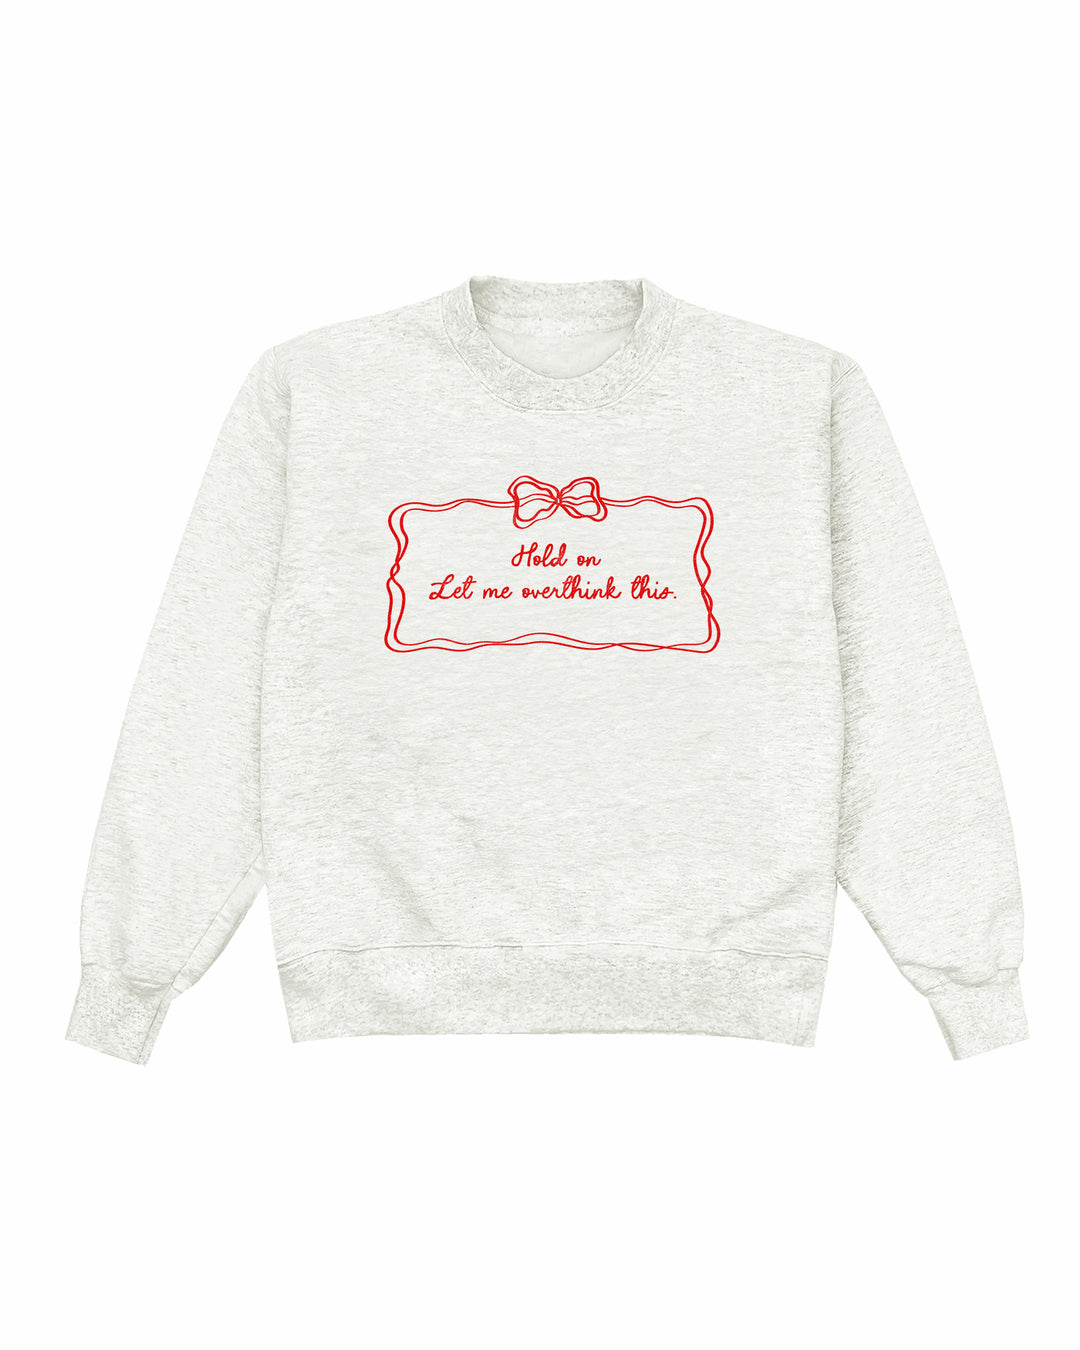 Hold On Let Me Overthink This Crewneck